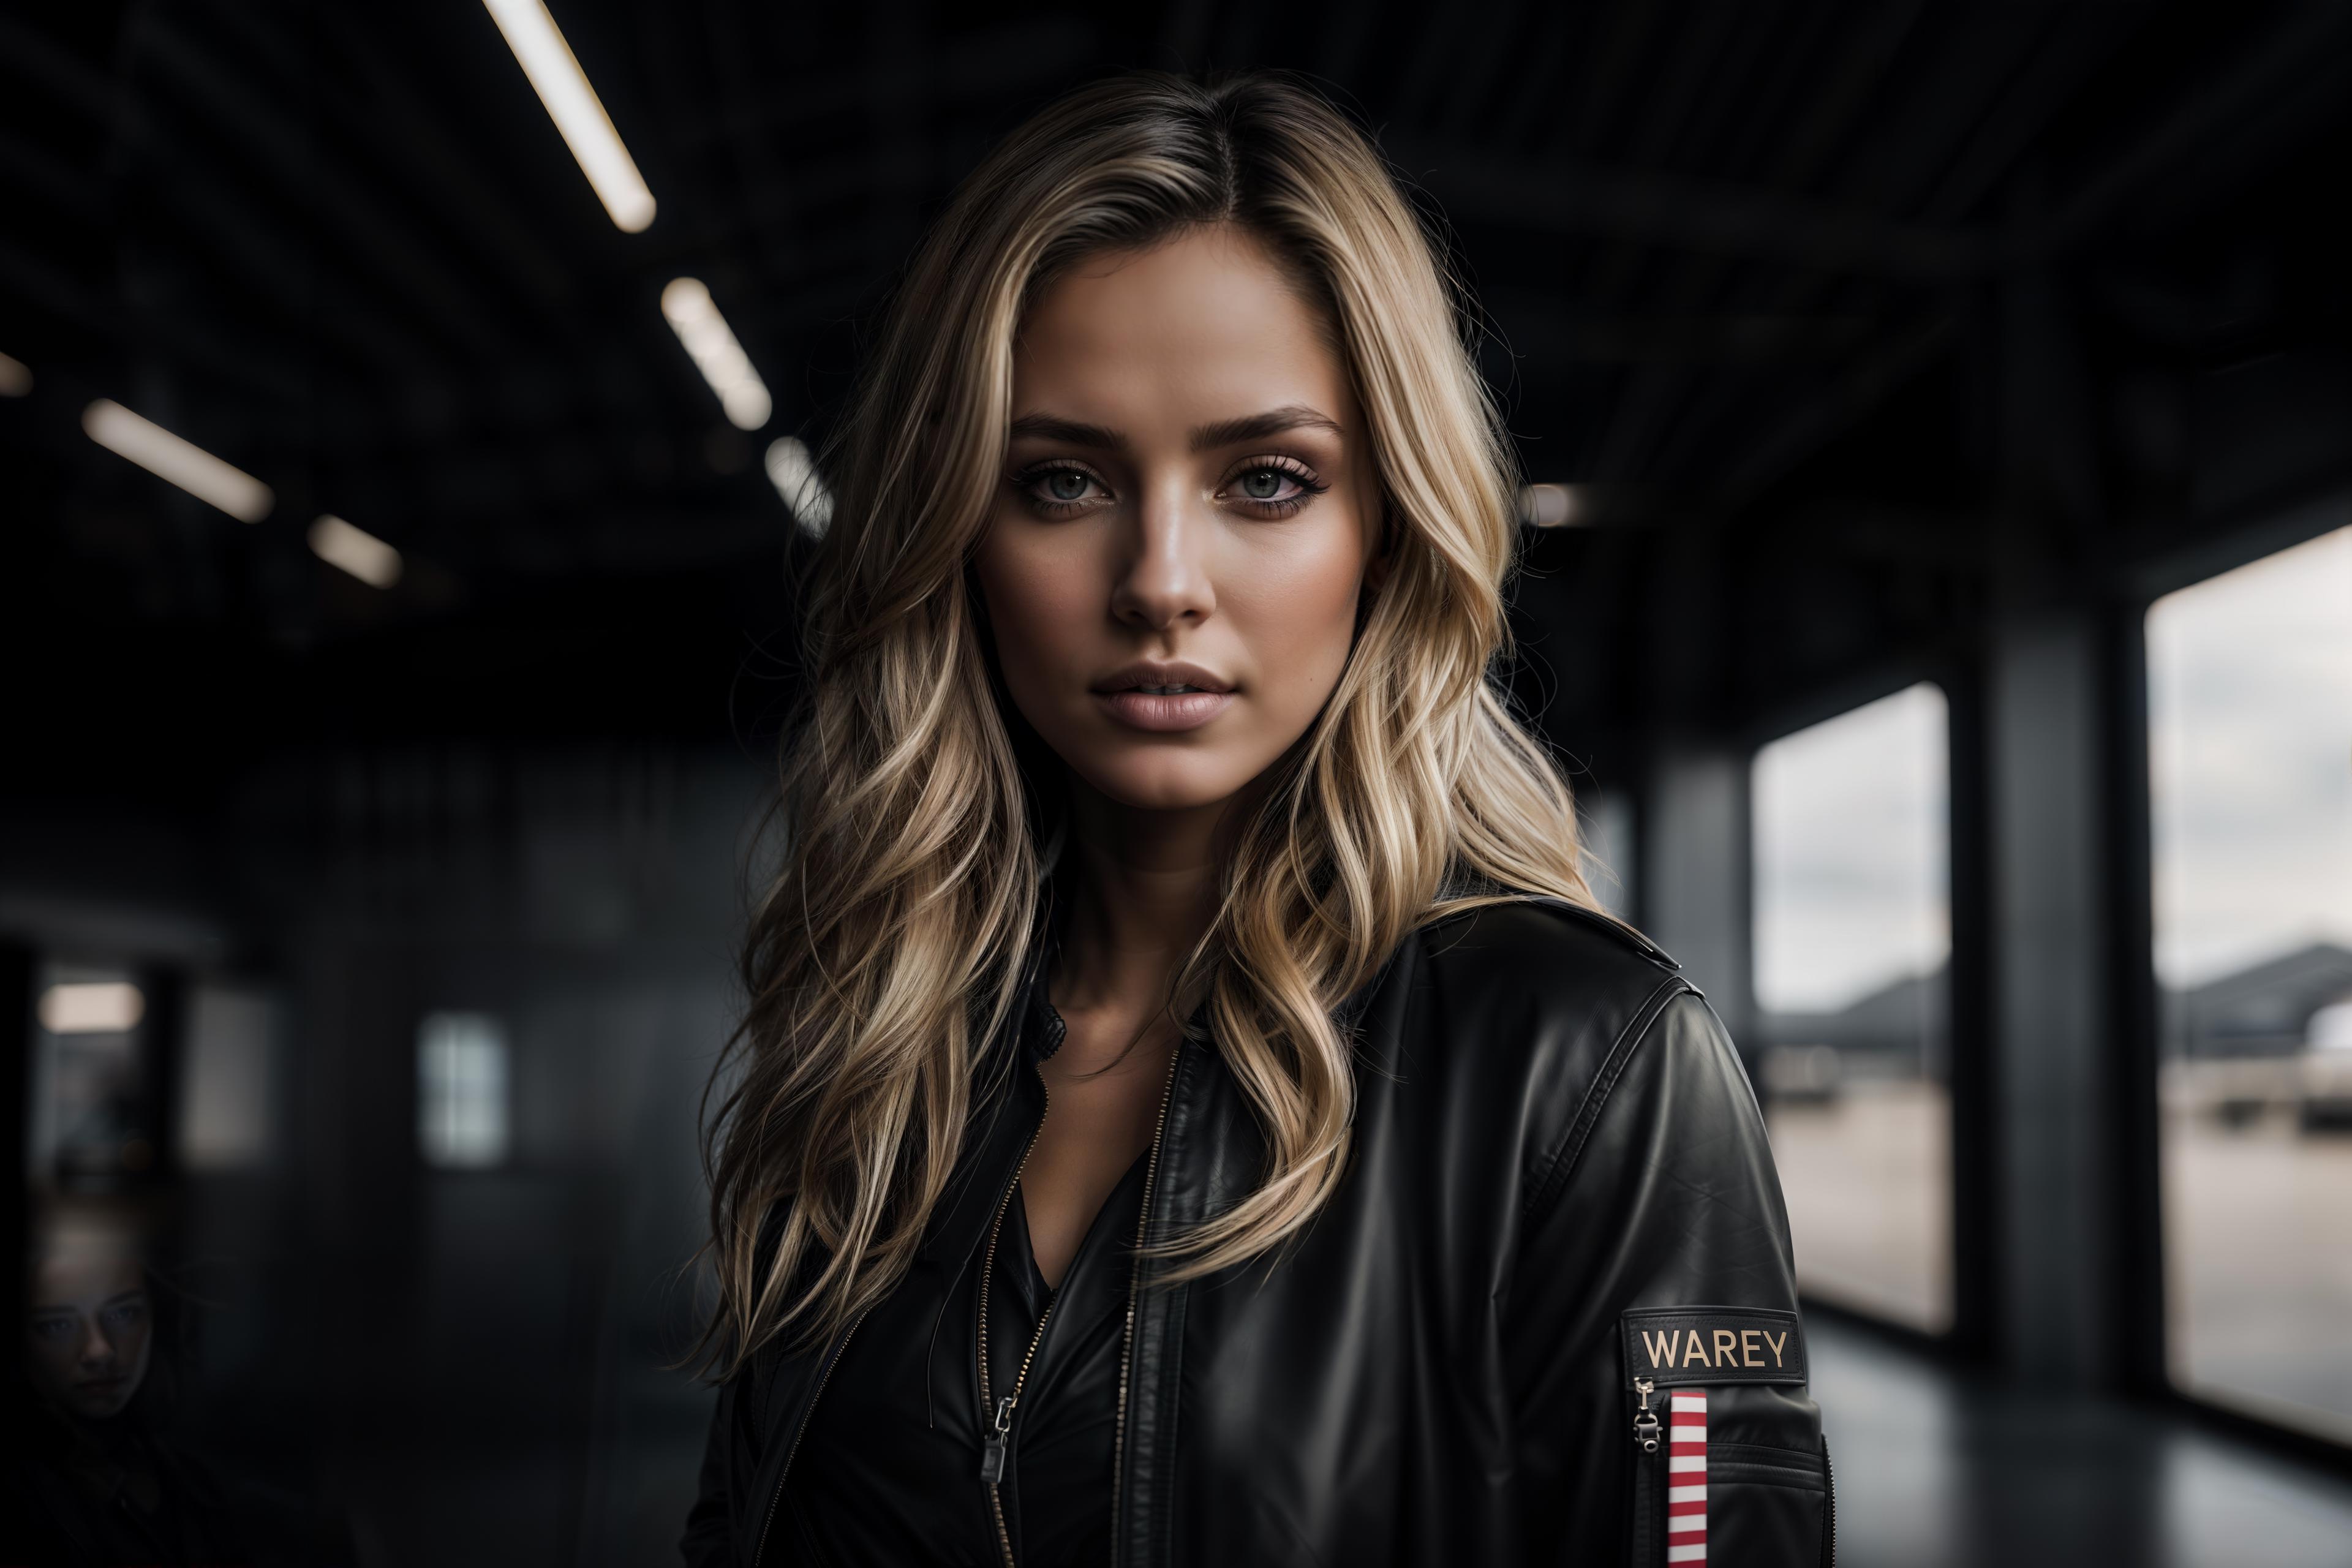 A blonde woman with a leather jacket and blue eyes.